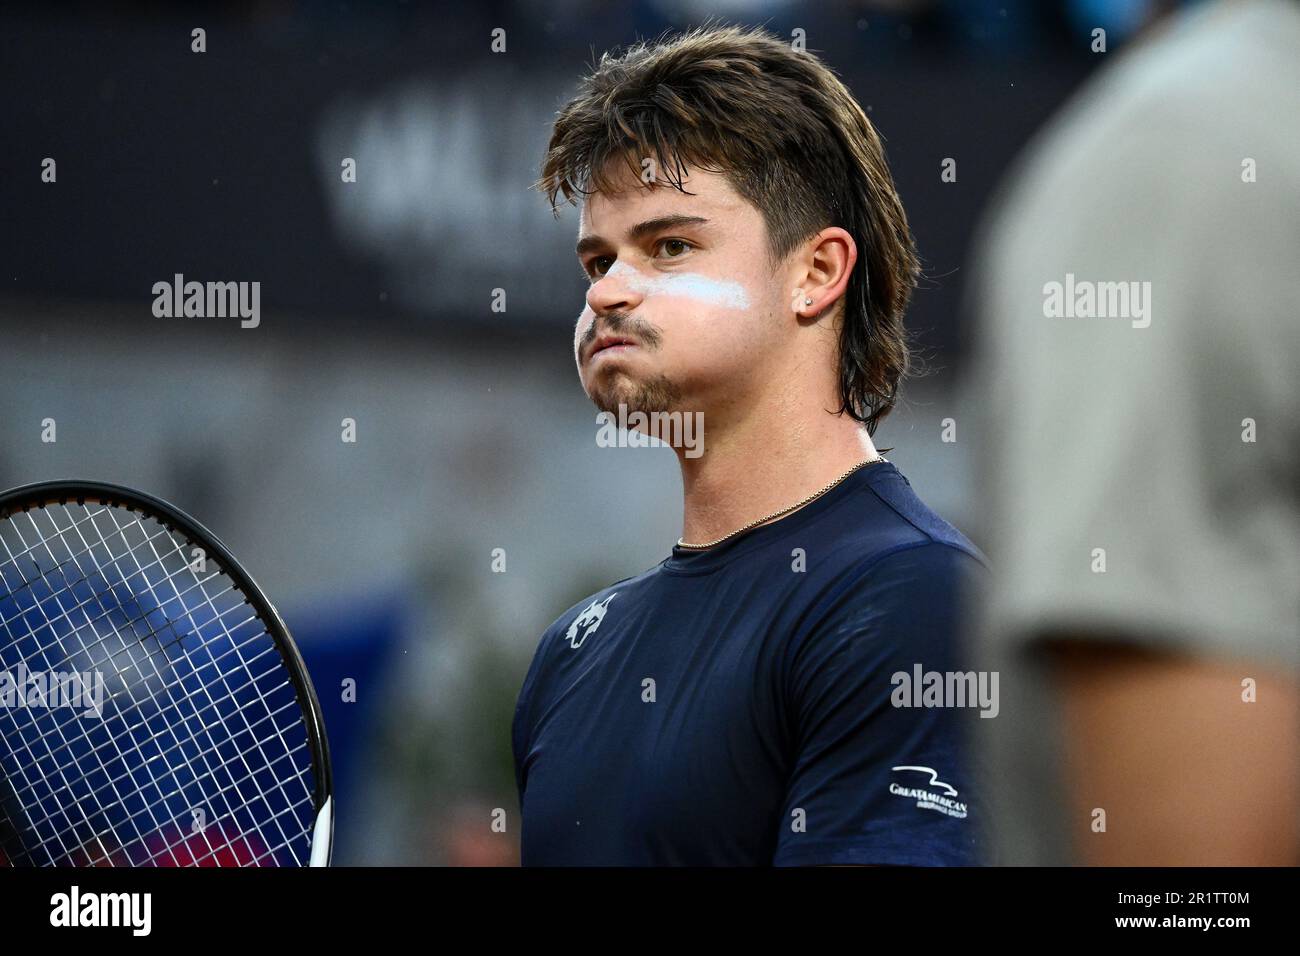 Rome, Italy. 15th May, 2023. Jeffrey John JJ Wolf of United States of America reacts during his match against Alexander Zverev of Germany at the Internazionali BNL d'Italia tennis tournament at Foro Italico in Rome, Italy on May 15th, 2023. Credit: Insidefoto di andrea staccioli/Alamy Live News Stock Photo